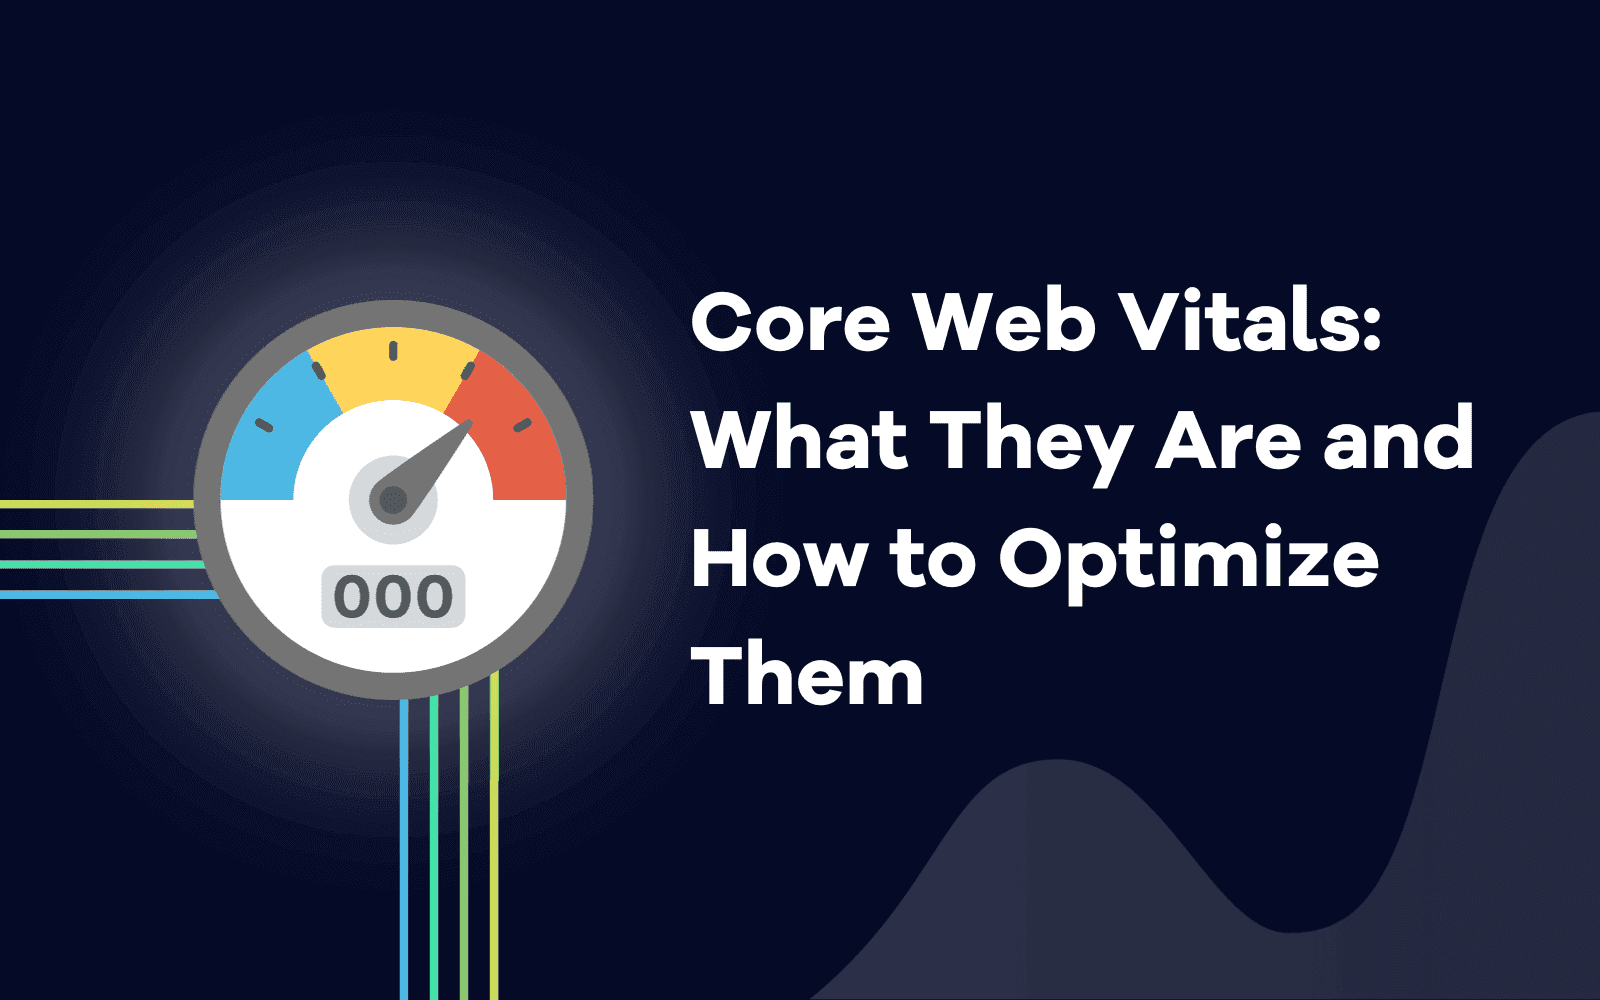 Core Web Vitals What They Are and How to Optimize Them